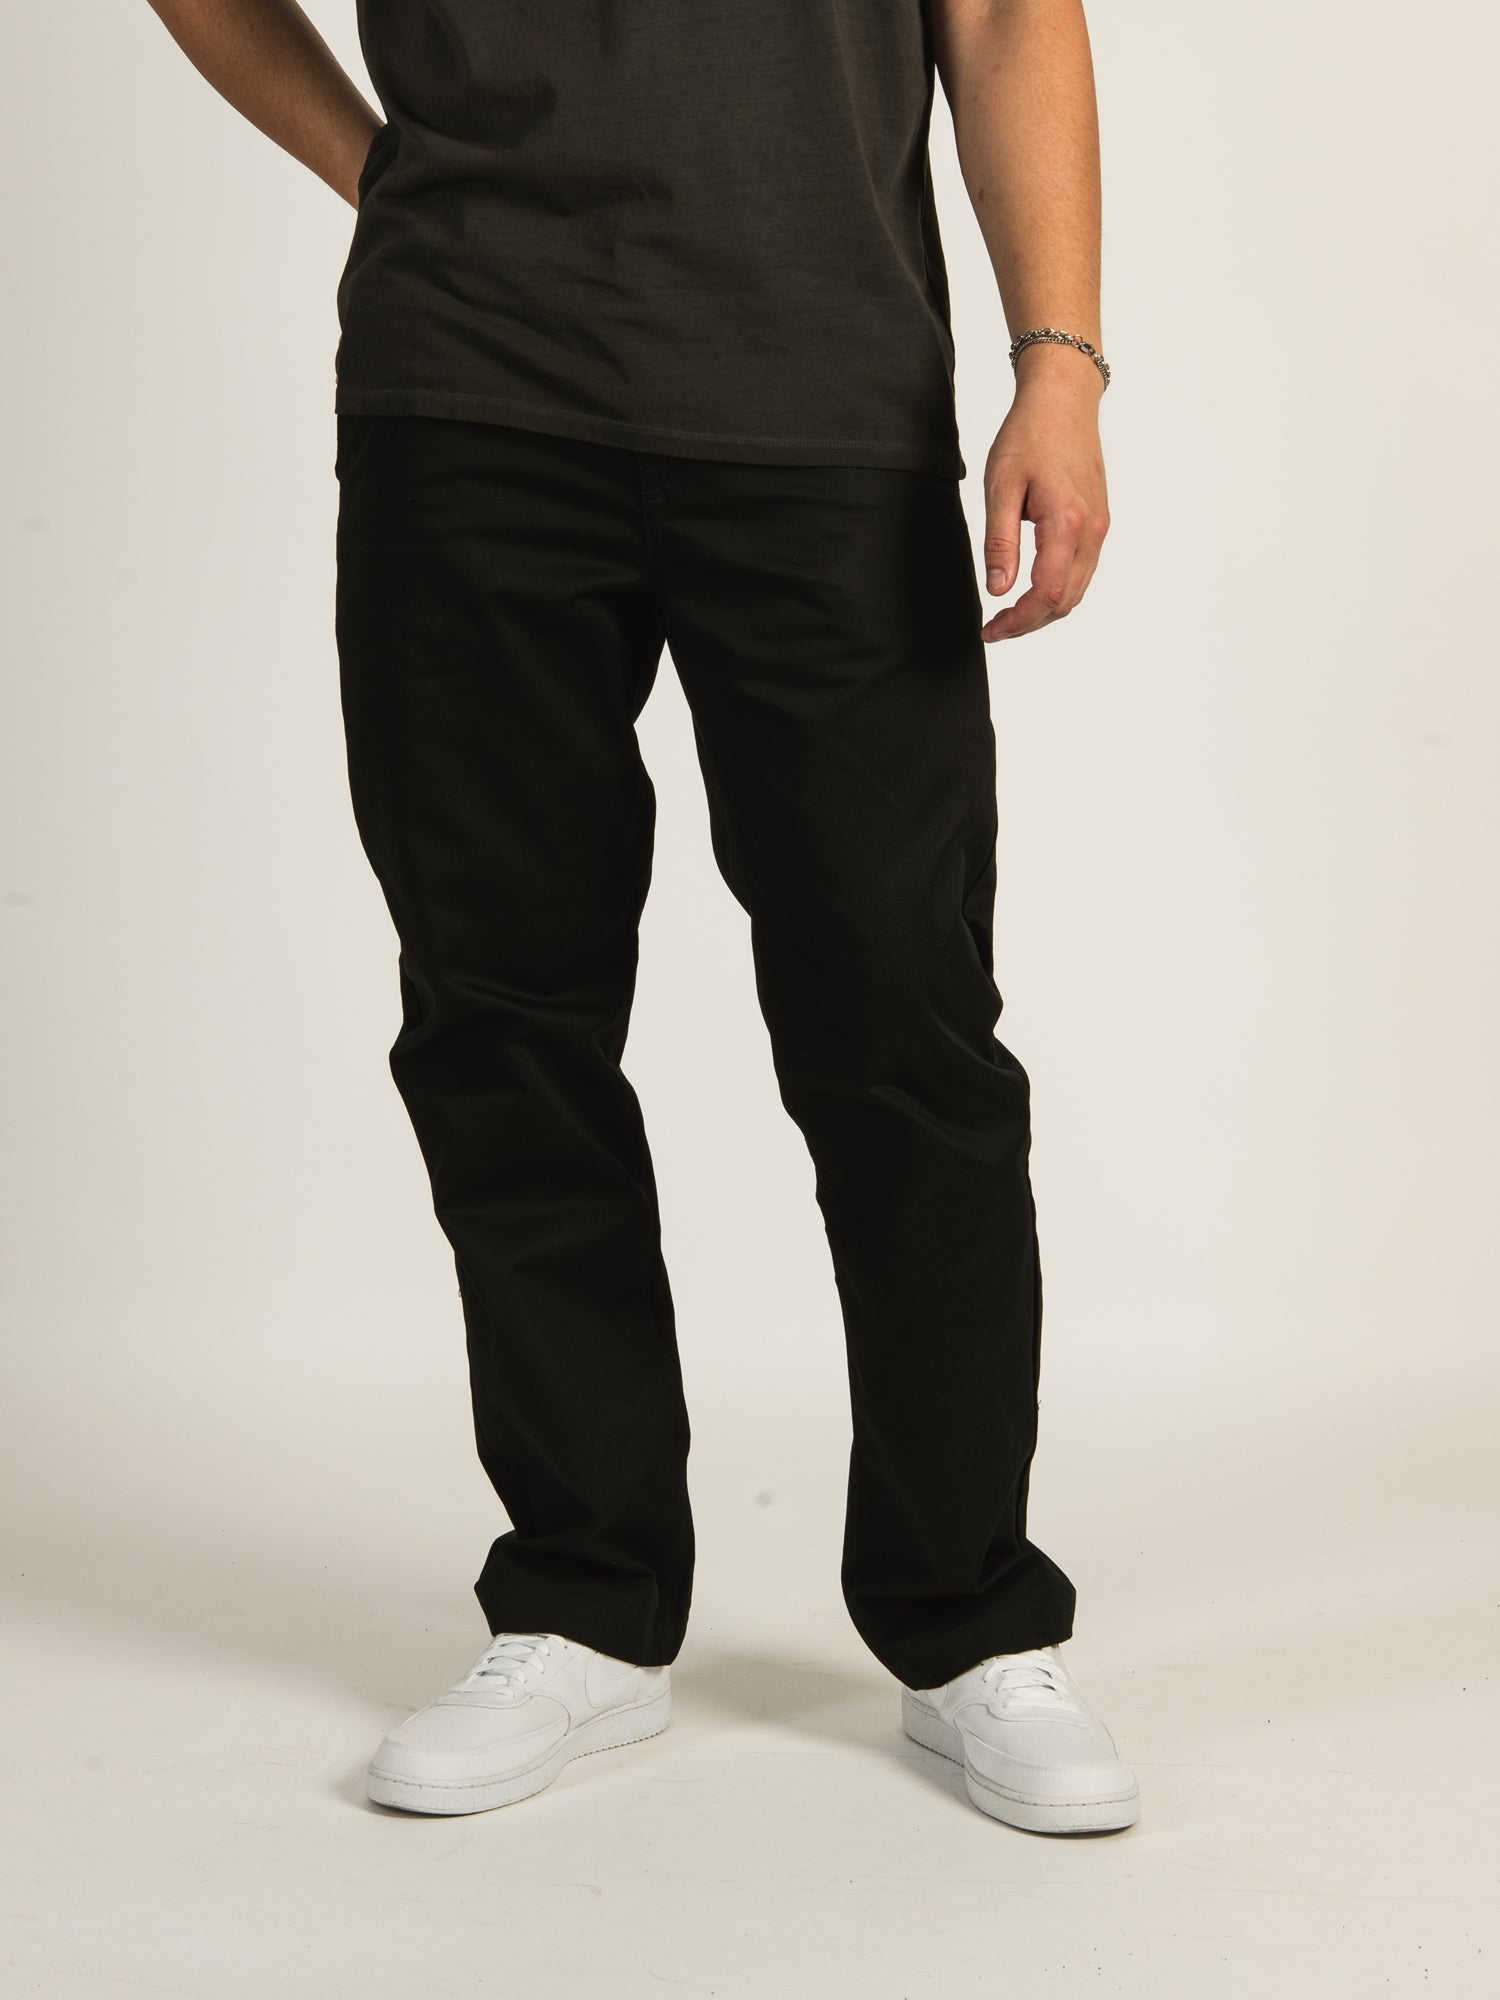 SAXX SNOOZE PANT - BLACK - CLEARANCE